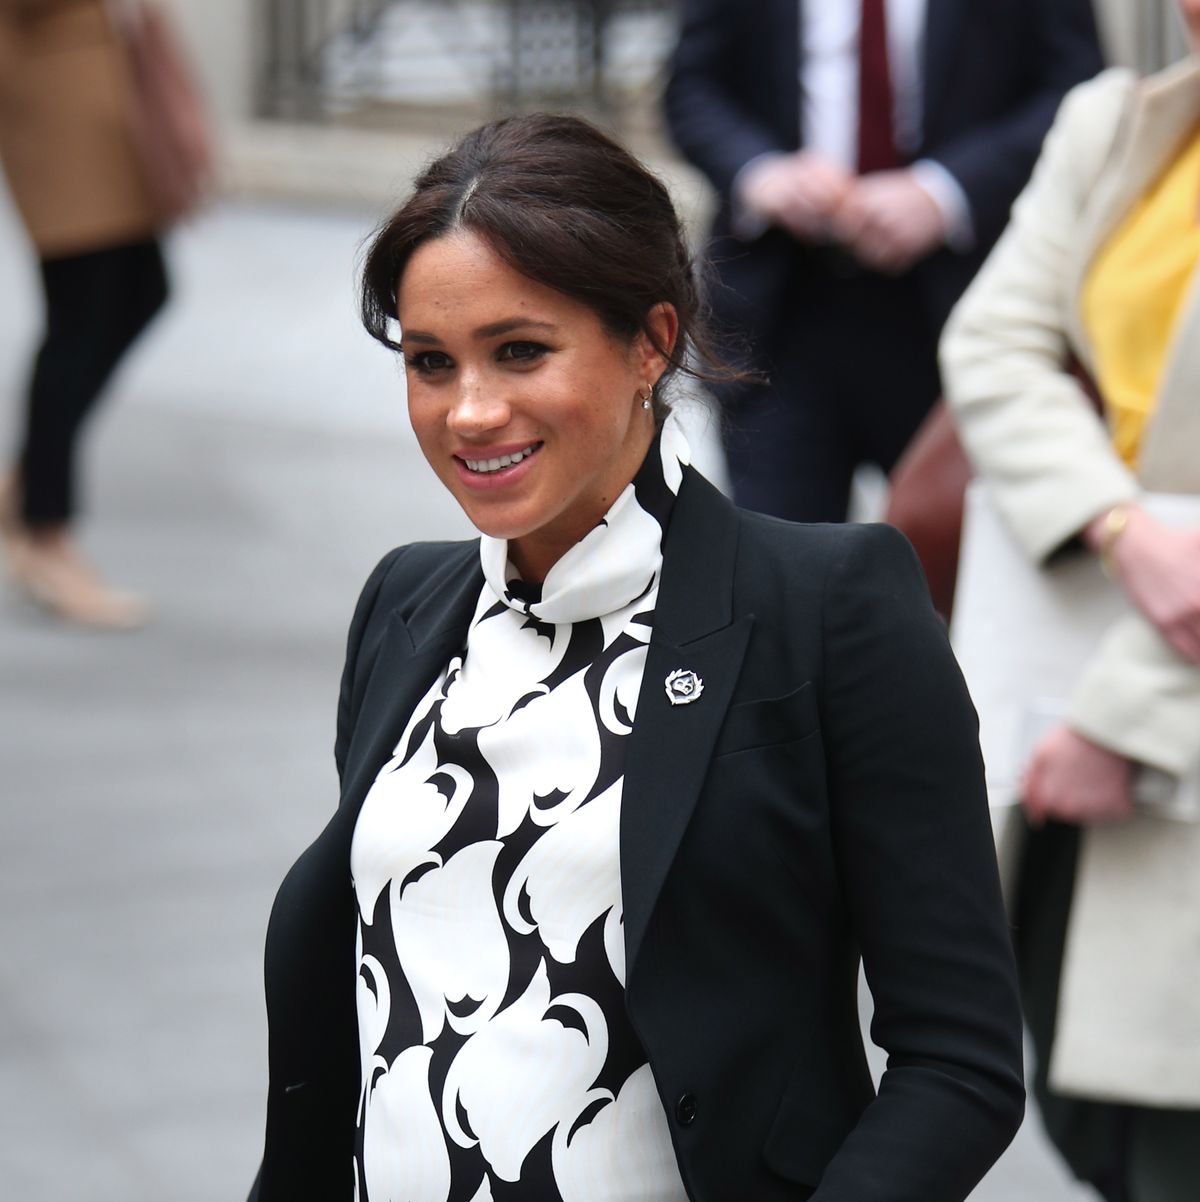 Meghan Markle International Women's Day Outfit - What Print Did Meghan ...